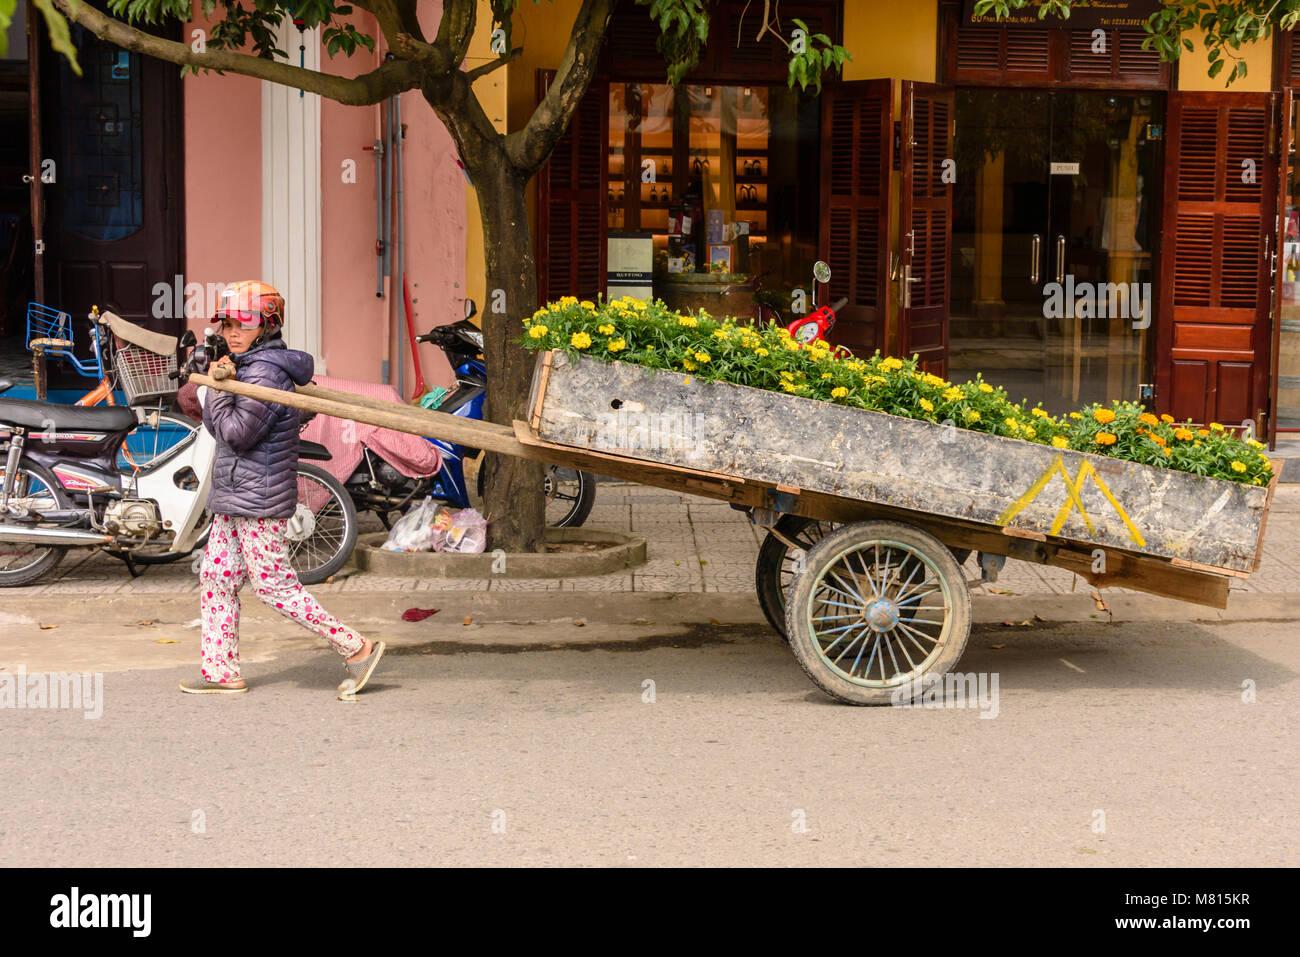 A small woman pulls a large handcart containing 'lucky' yellow chrysanthemums to celebrate the Chinese Lunar New Year in Hoi An, Vietnam Stock Photo